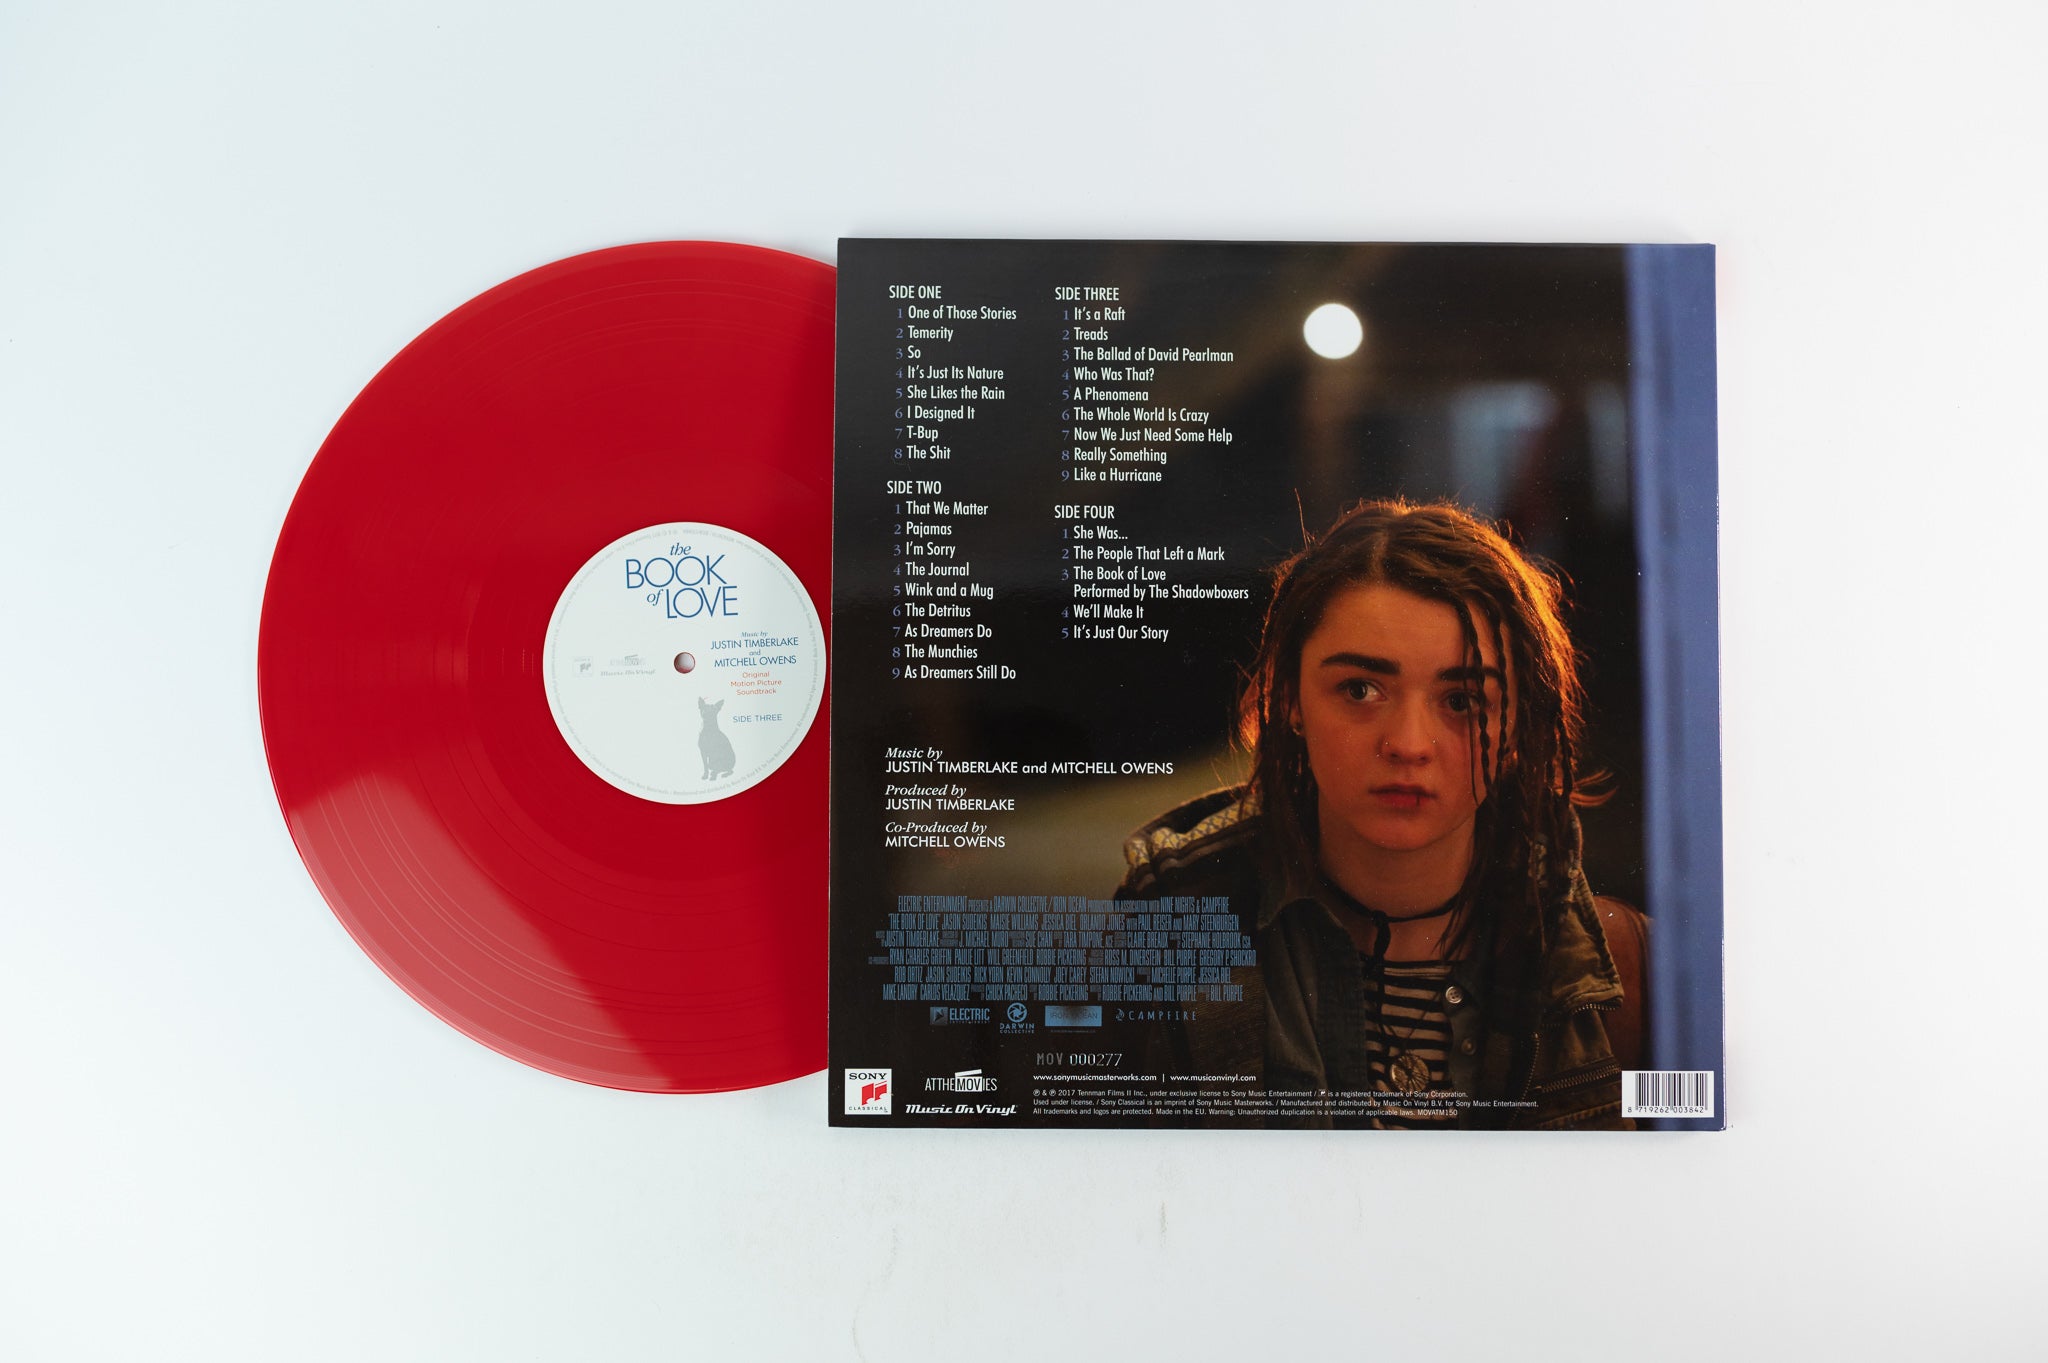 Justin Timberlake And Mitchell Owens - The Book Of Love (Soundtrack) on Music on Vinyl Limited Numbered Red Vinyl